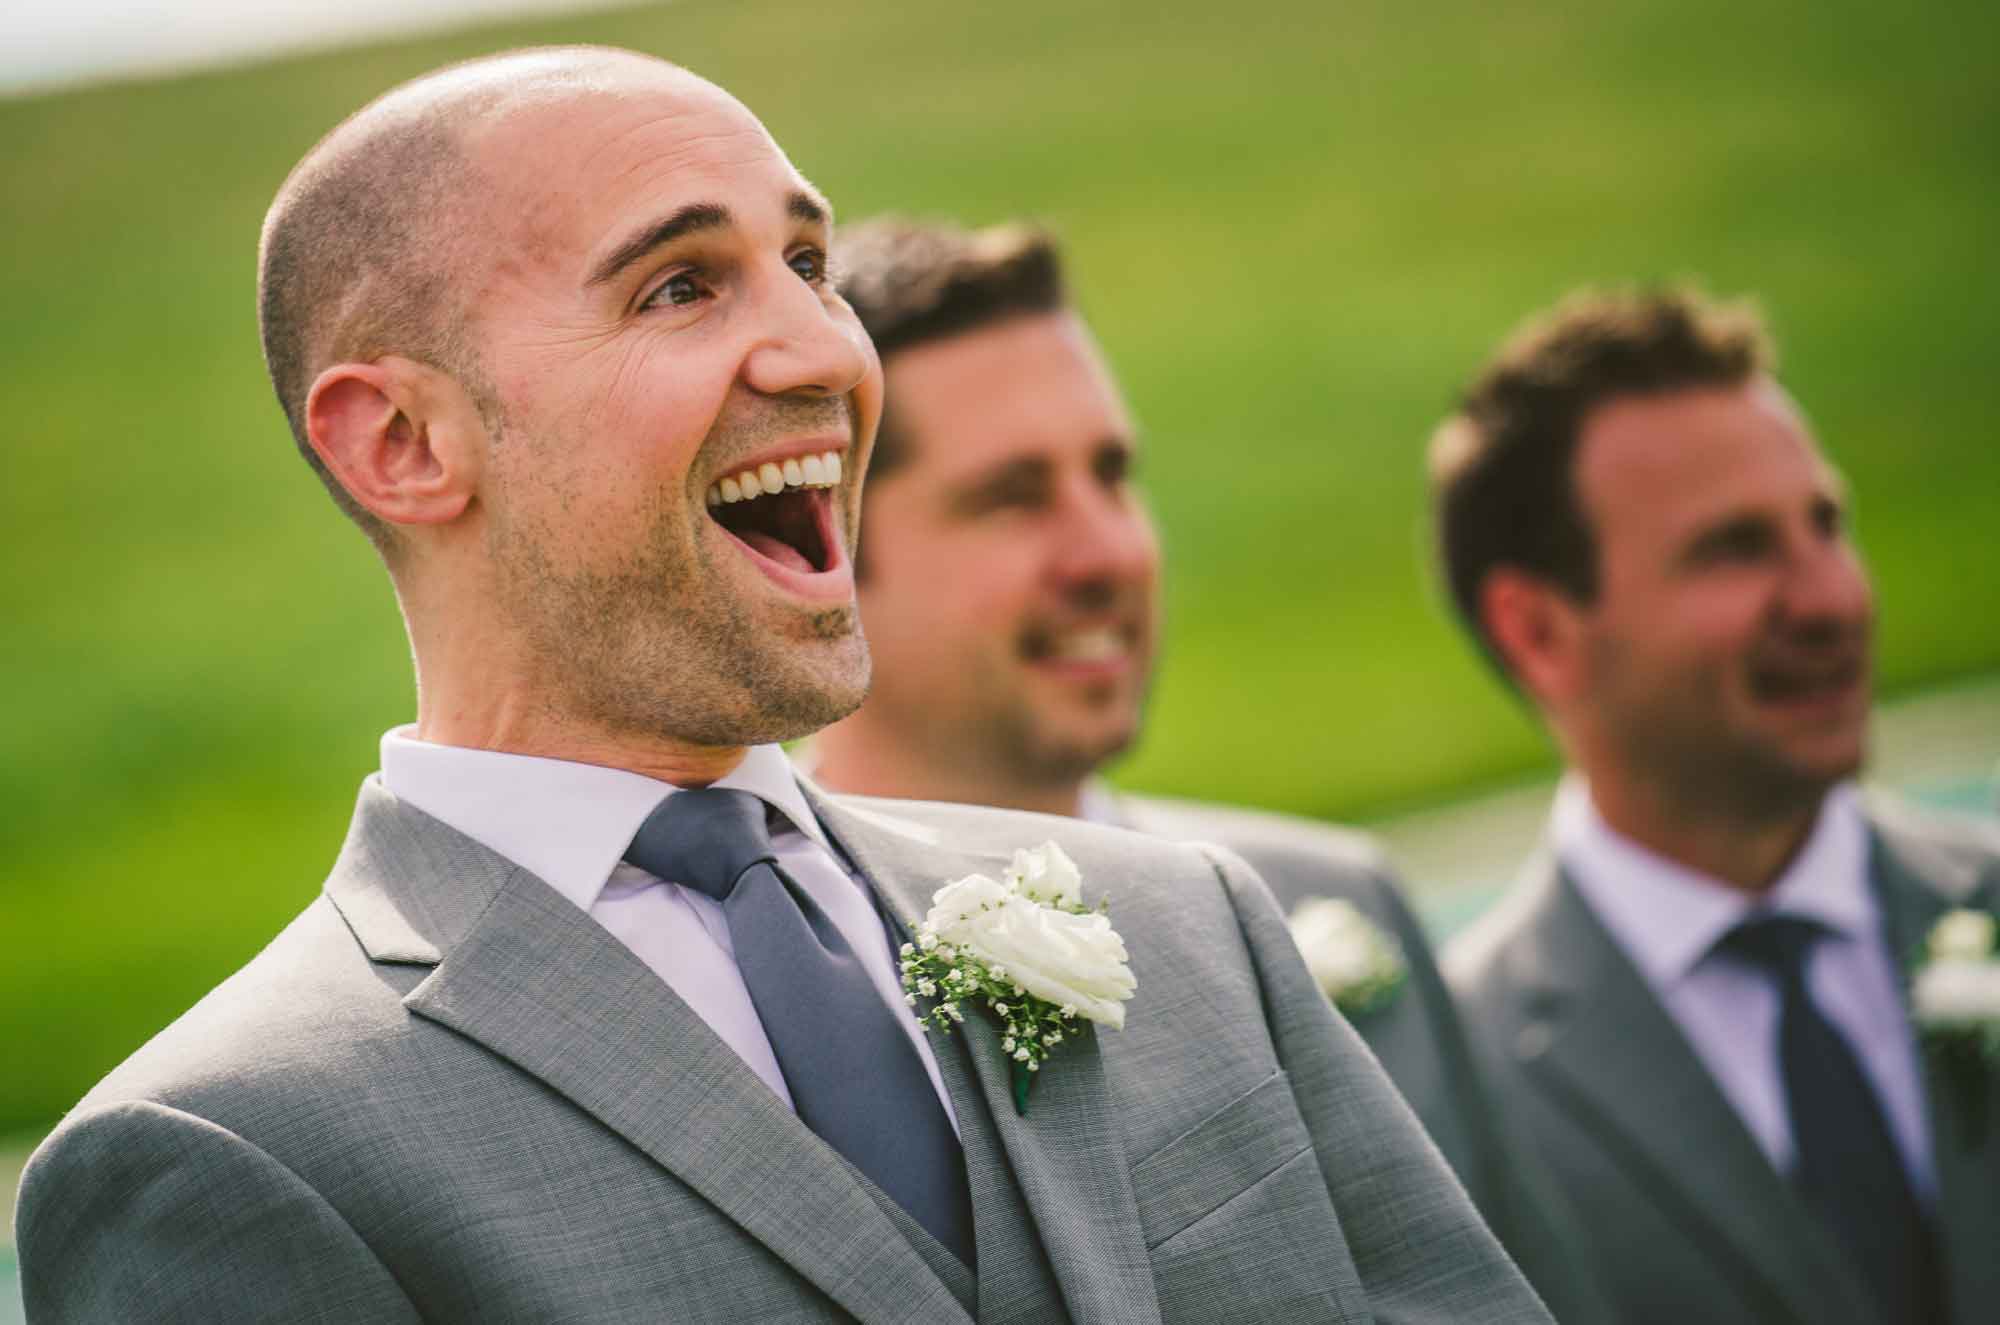 Groom reaction shot first look at bride